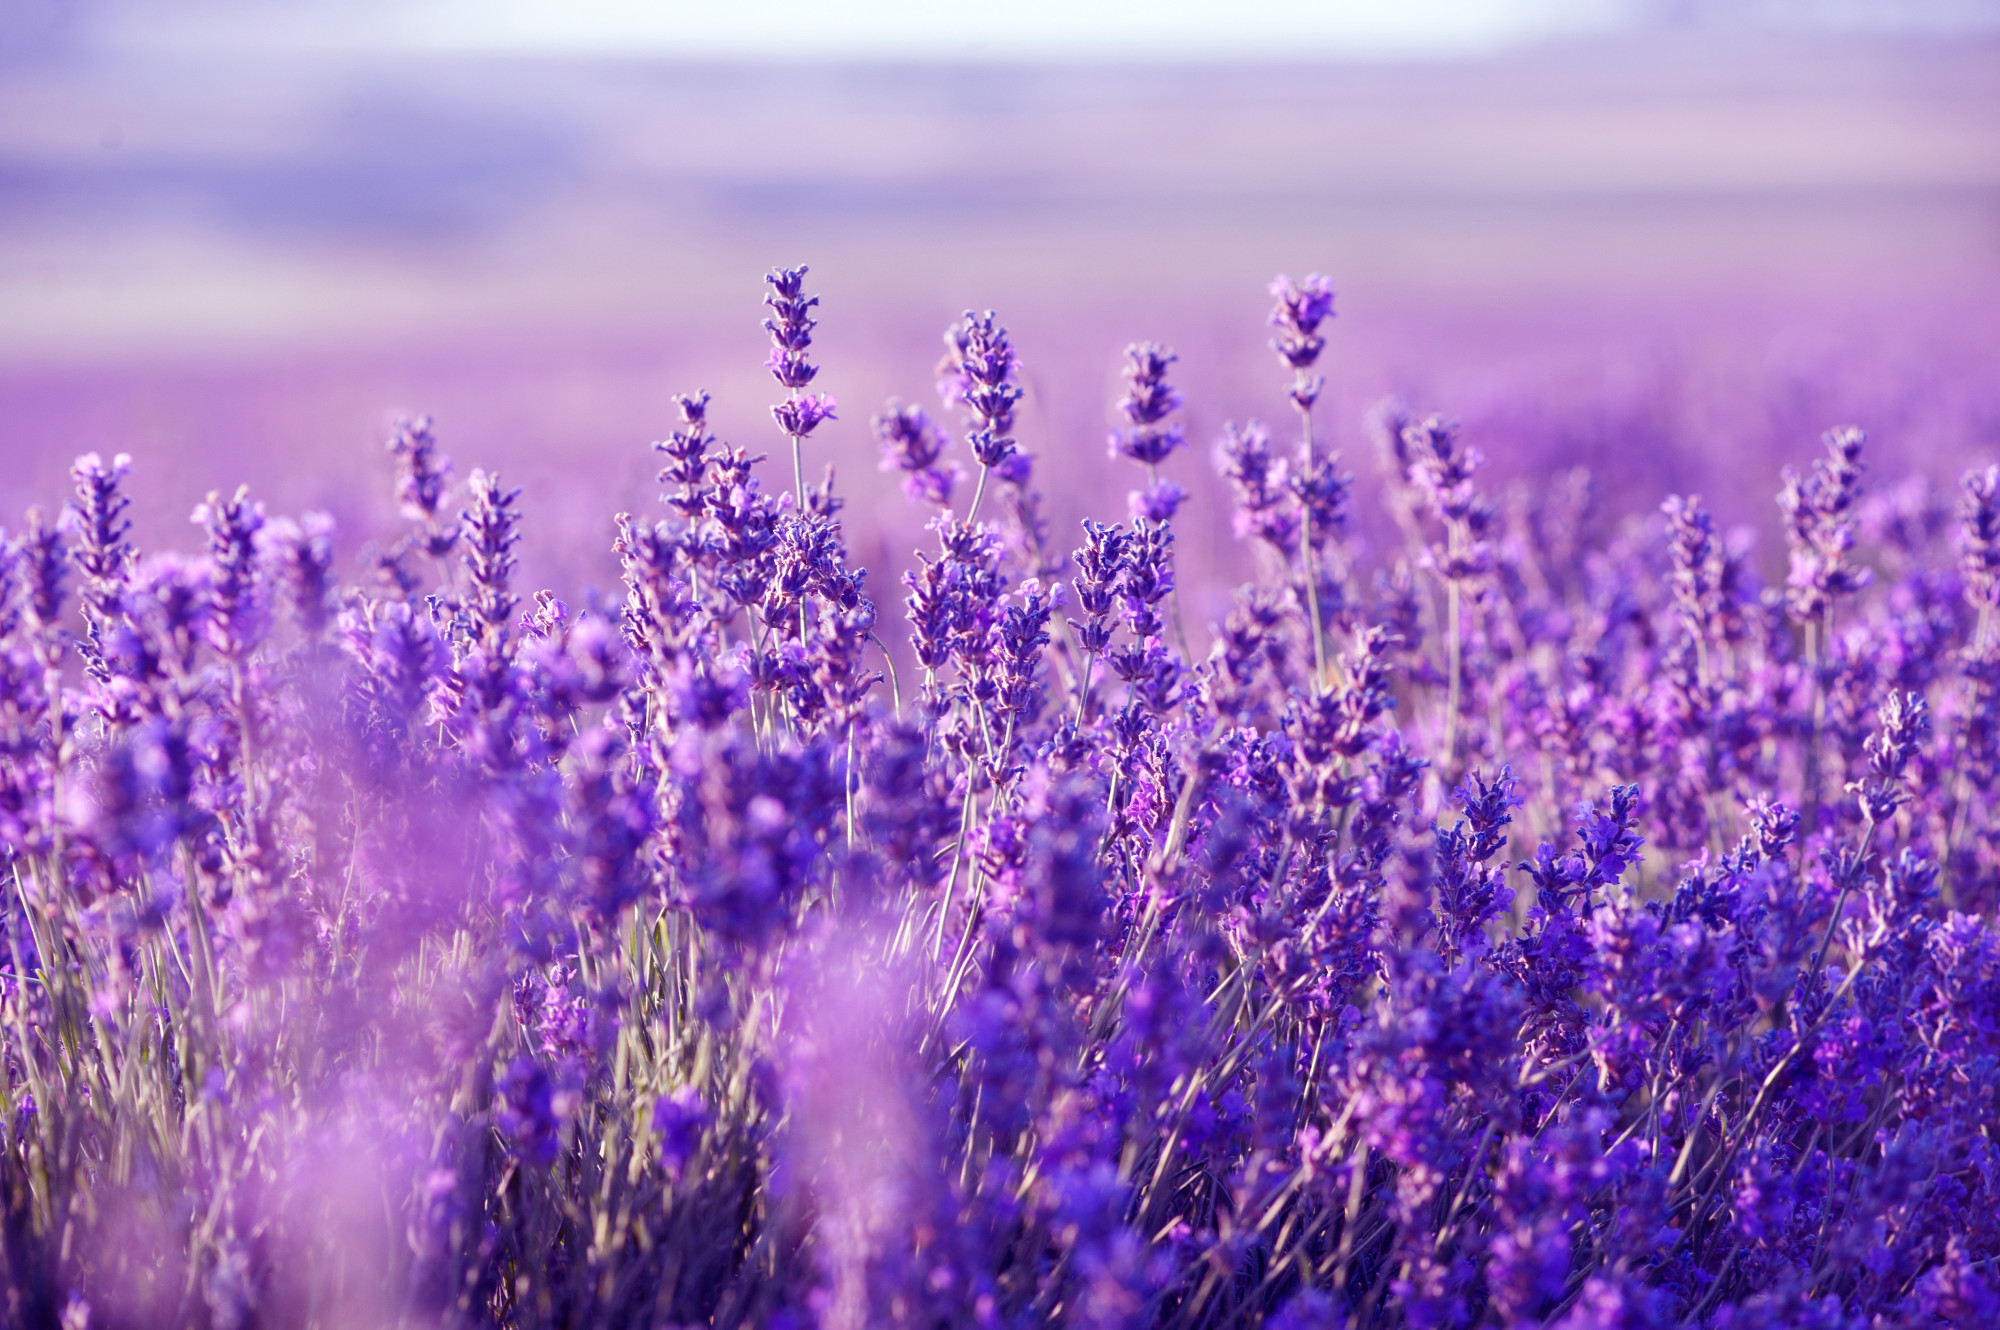 Lavender Wallpapers High Quality Download 2000x1330